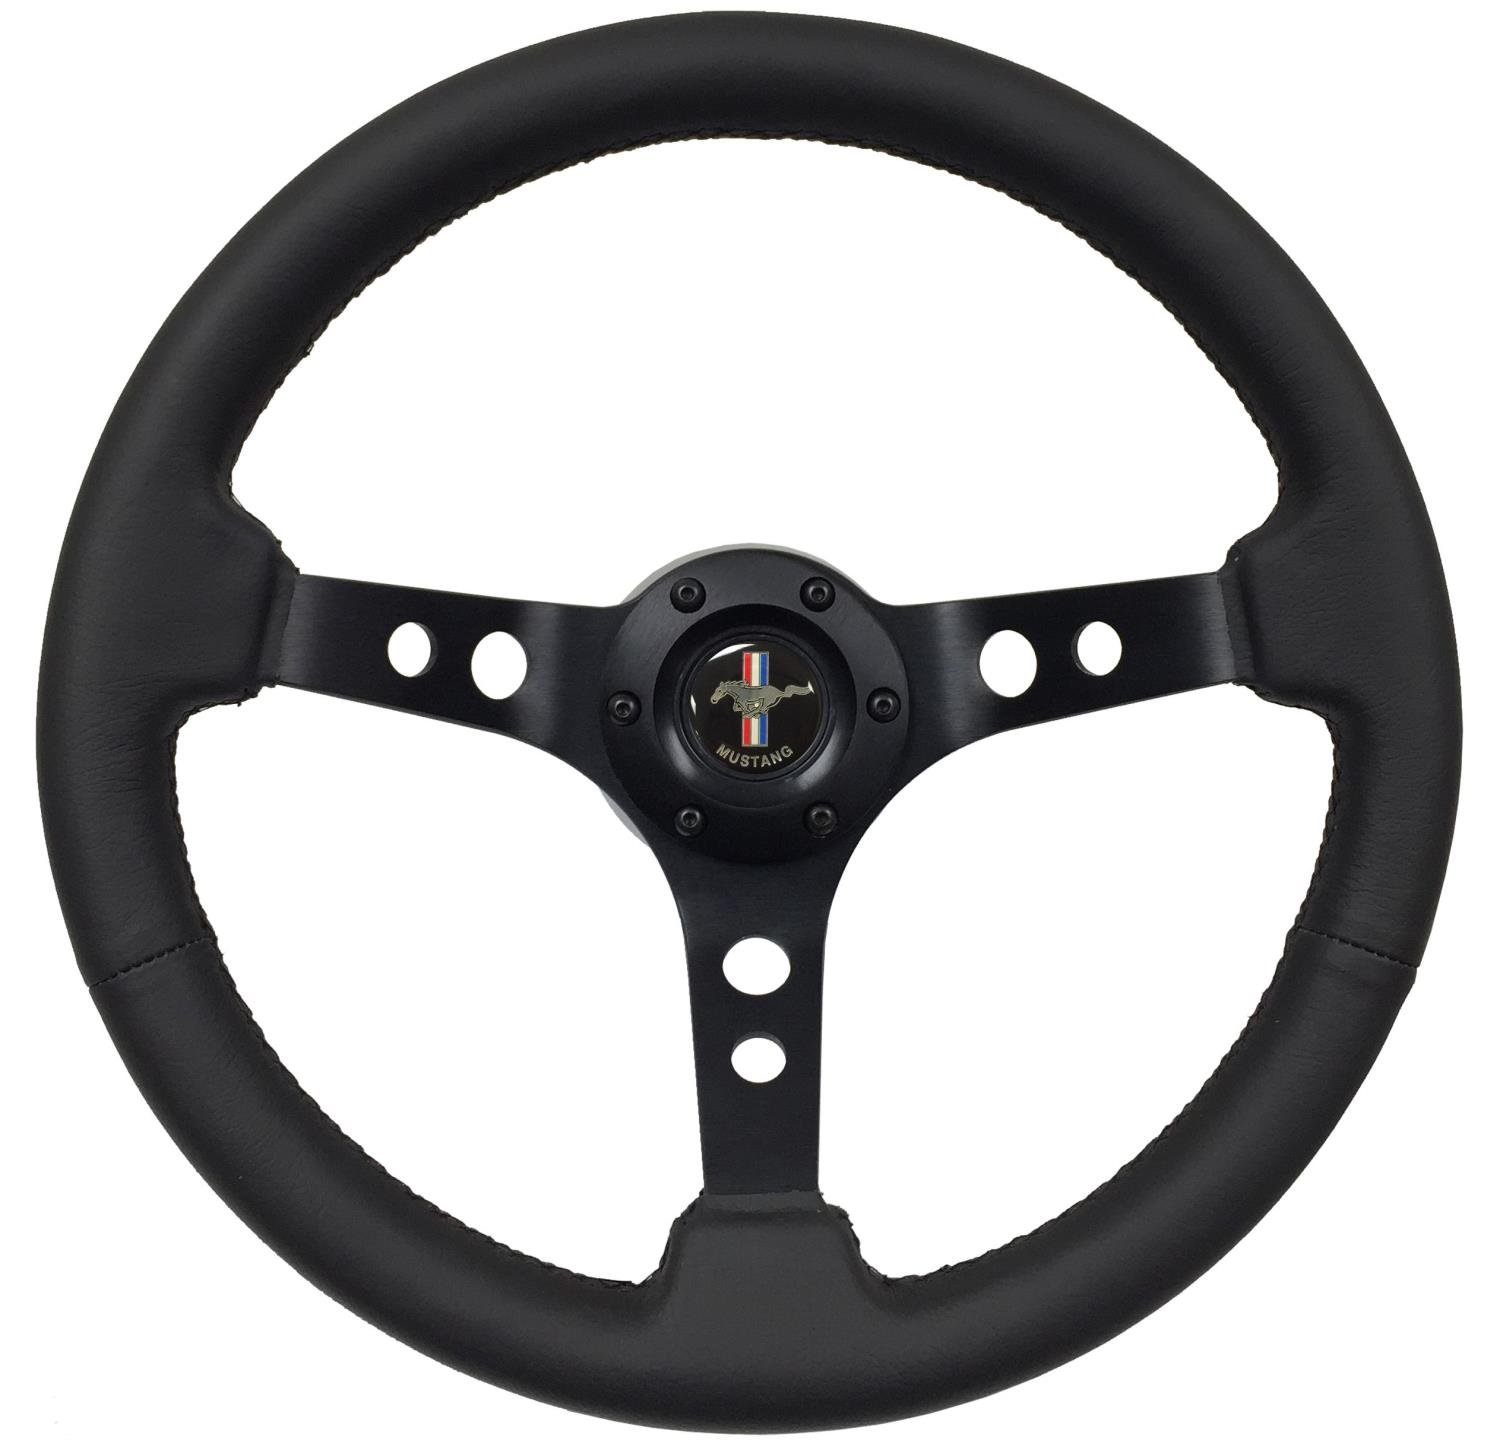 S6 Sport Steering Wheel Kit for 1968-1973 Ford/Mercury, 14 in. Diameter, Black Leather Grip, with 6-Bolt Adapter and Horn Button